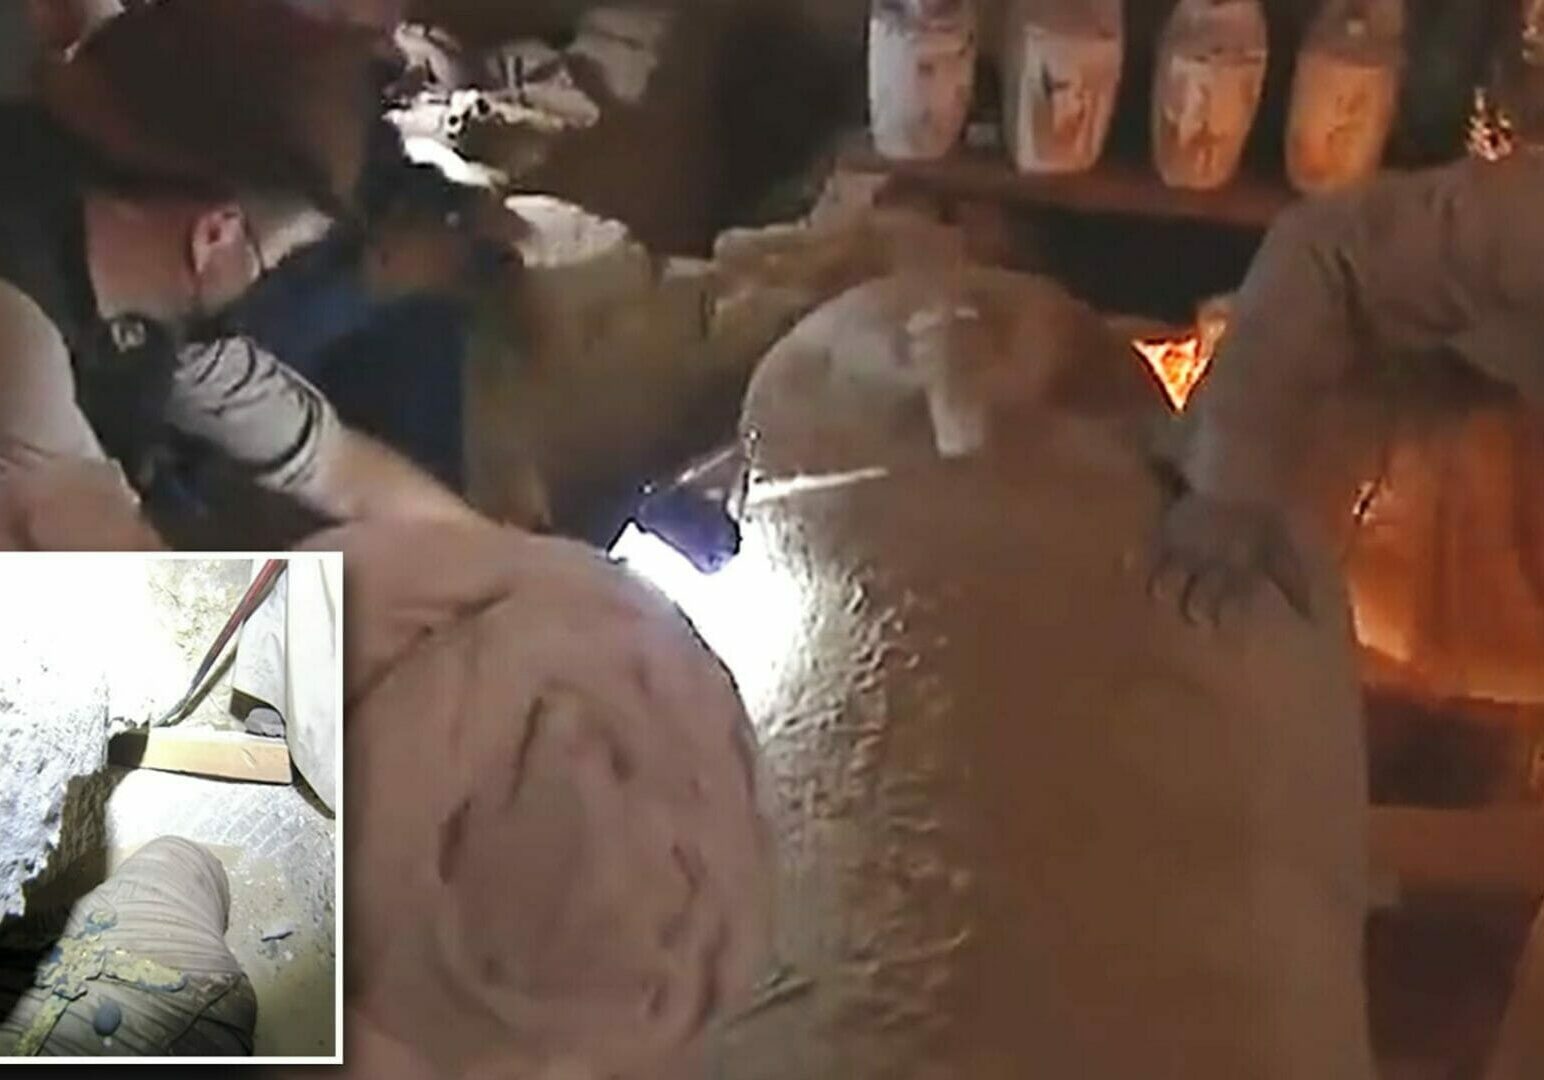 Opening Sarcophagus on Live TV